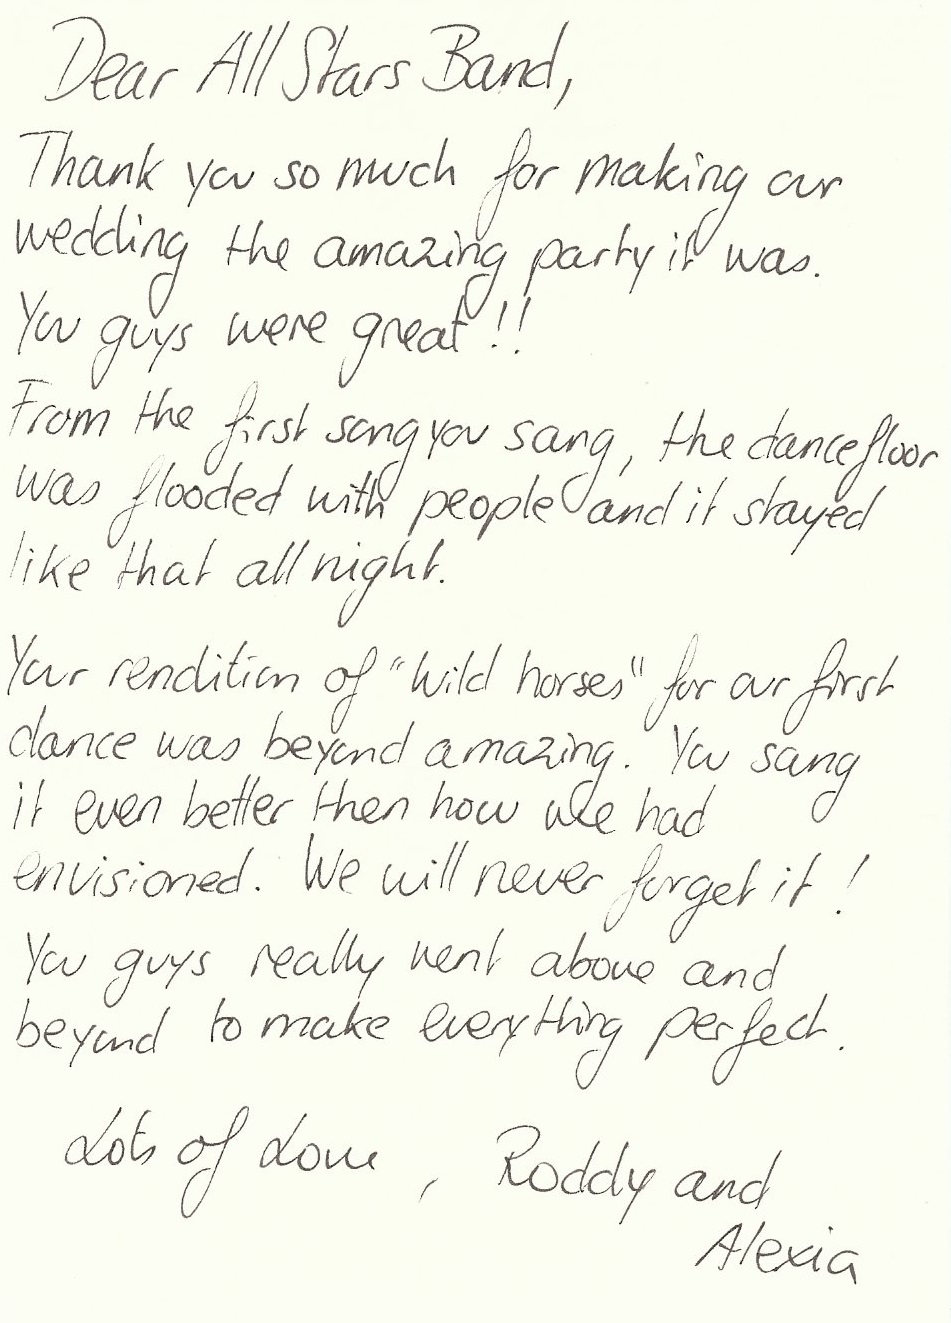 A Note From The Bride & Groom